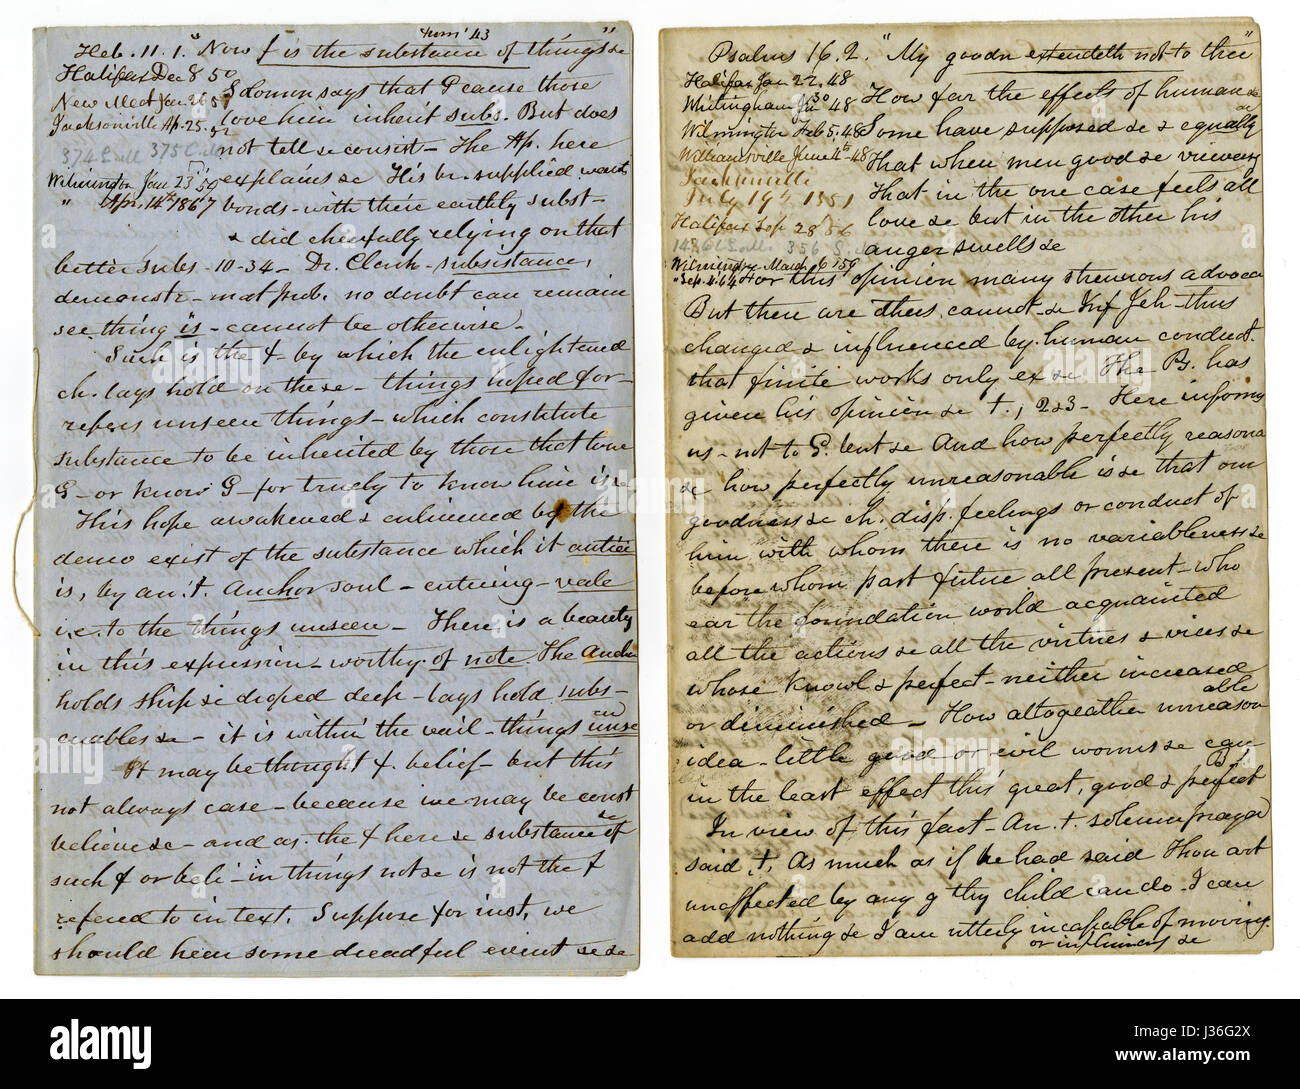 Antique c1860 hand written sermon from a traveling preacher. The one on the left draws from Hebrews 11:1 'Now faith is the substance of things hoped for, the evidence of things not seen.' The one on the right draws from Psalms 16:2 'Then they took him and brought him to a meeting of the Areopagus, where they said to him, 'O my soul, thou hast said unto the Lord, Thou art my Lord: my goodness extendeth not to thee;' The upper left corner on each lists a group of towns (up & down east coast of United States to Halifax, Canada) where the sermon was read in the 1850s and 1860s. Stock Photo